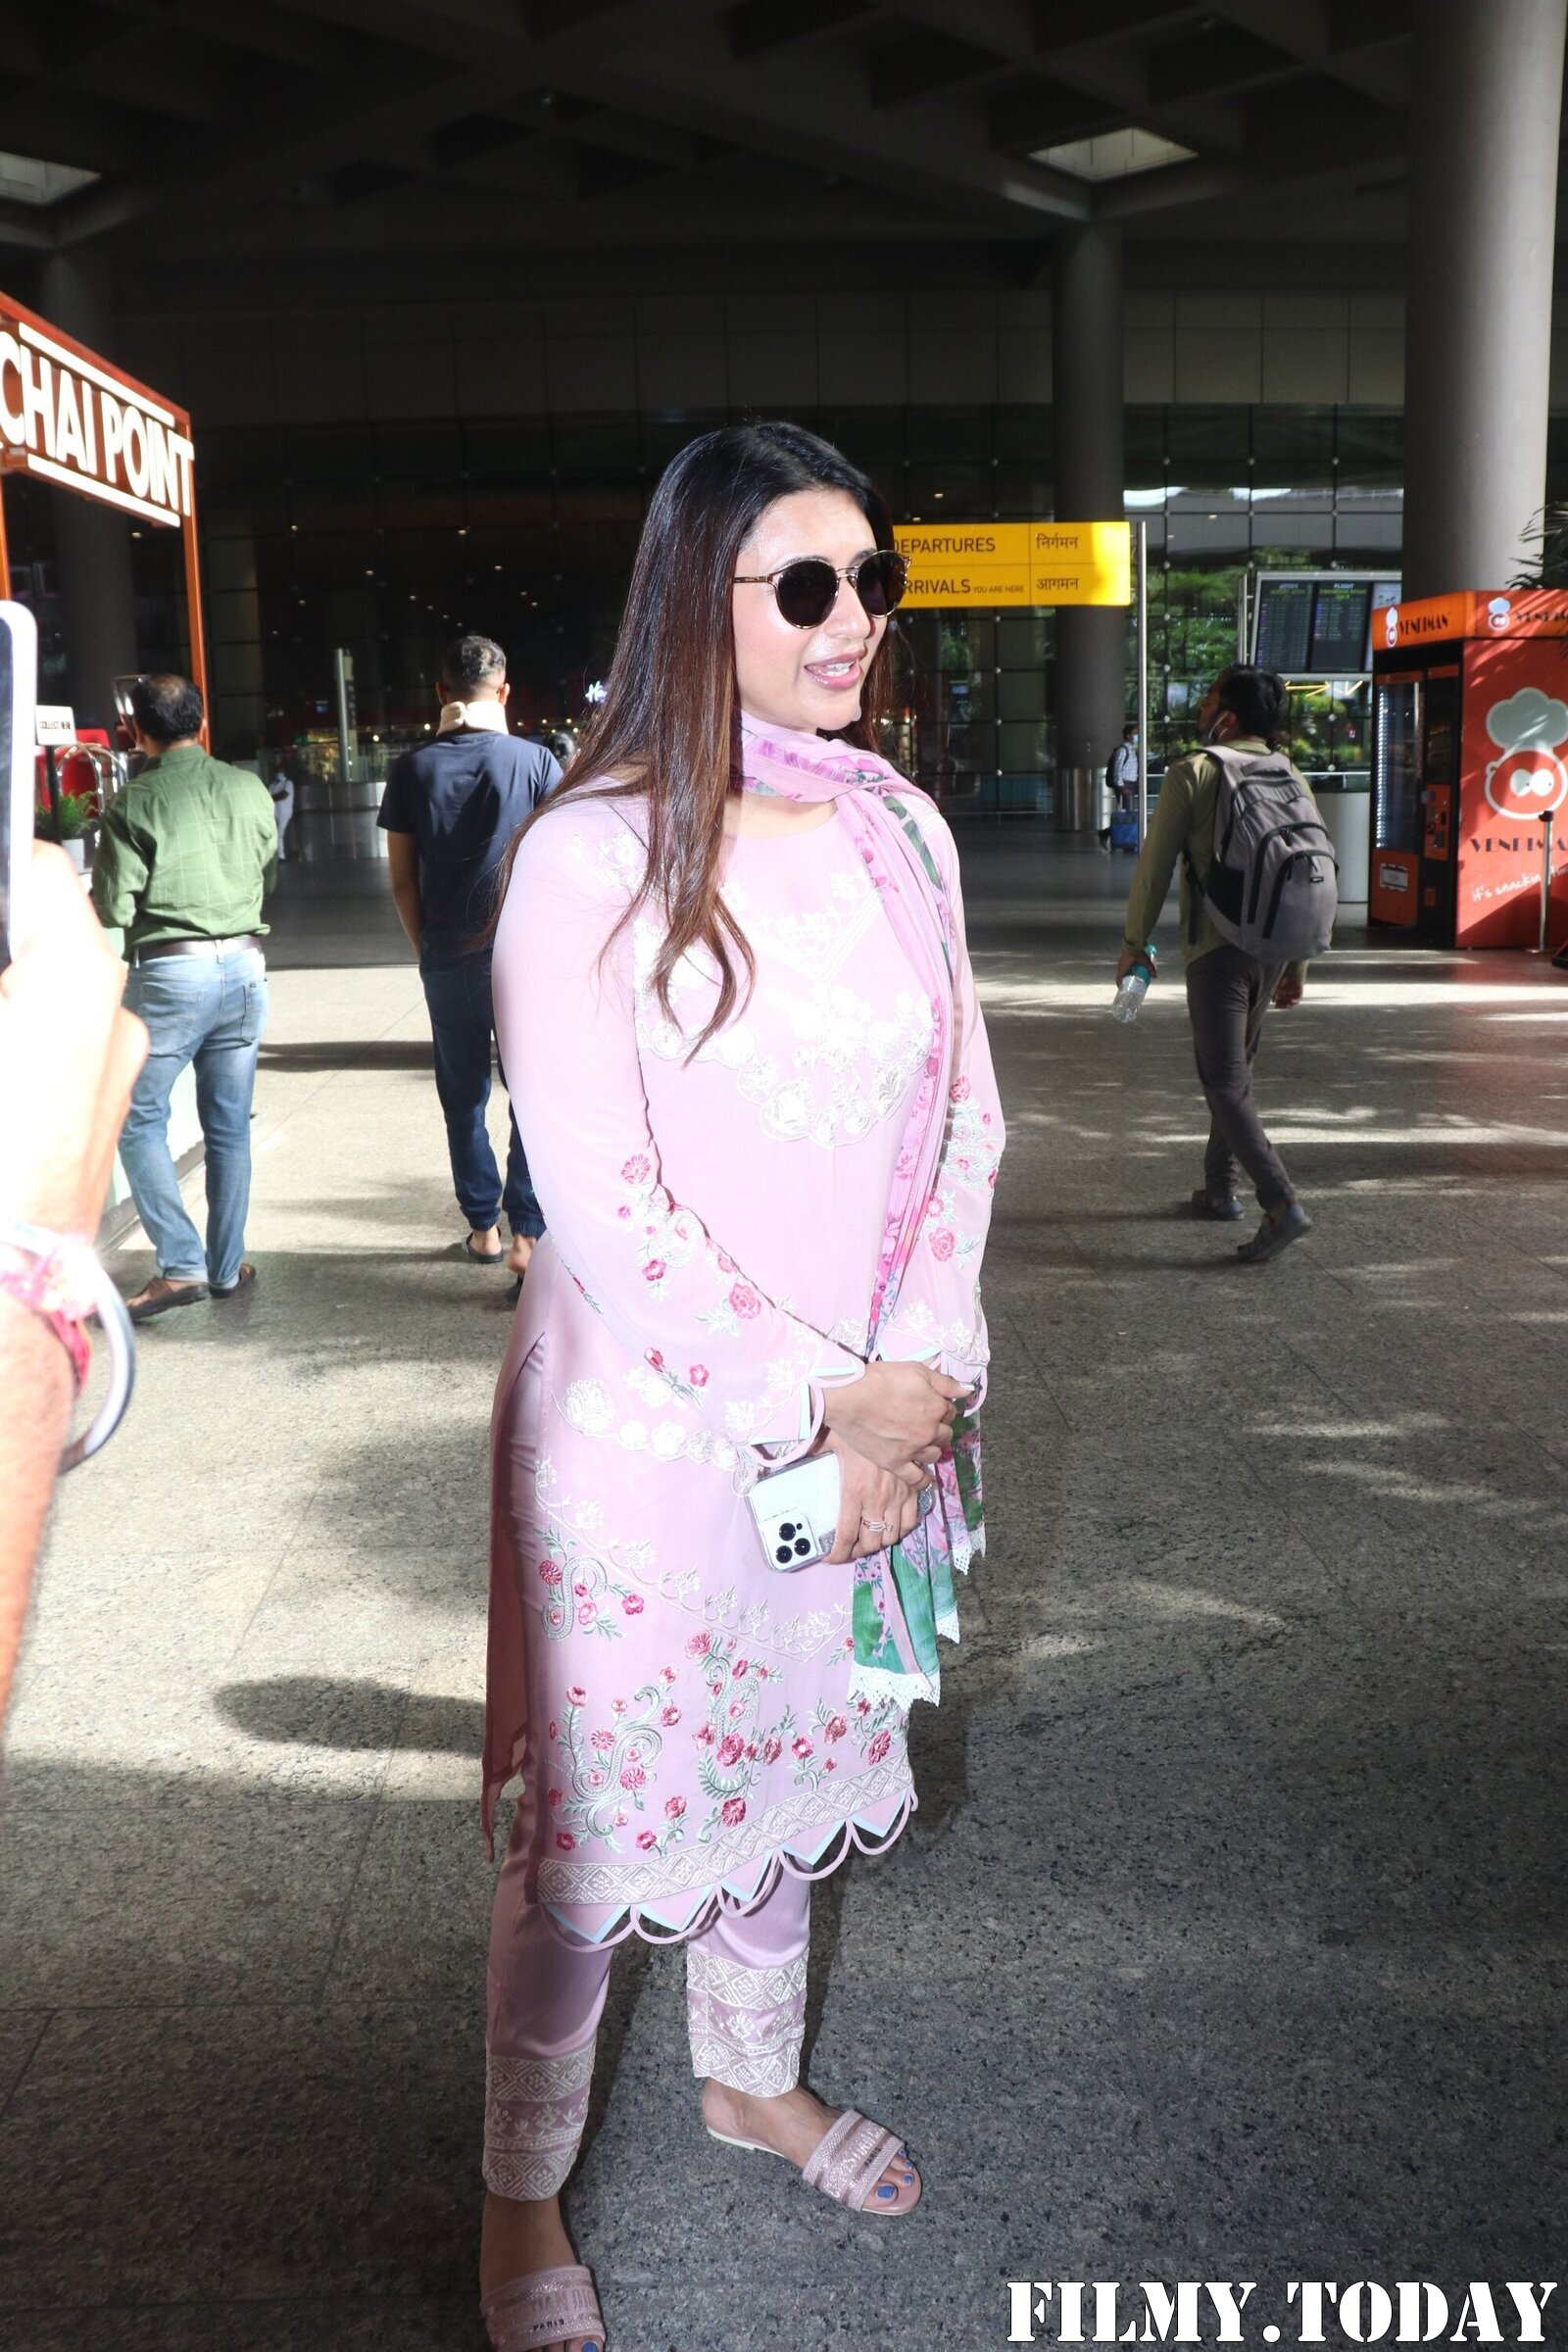 Divyanka Tripathi - Photos: Celebs Spotted At Airport | Picture 1867869